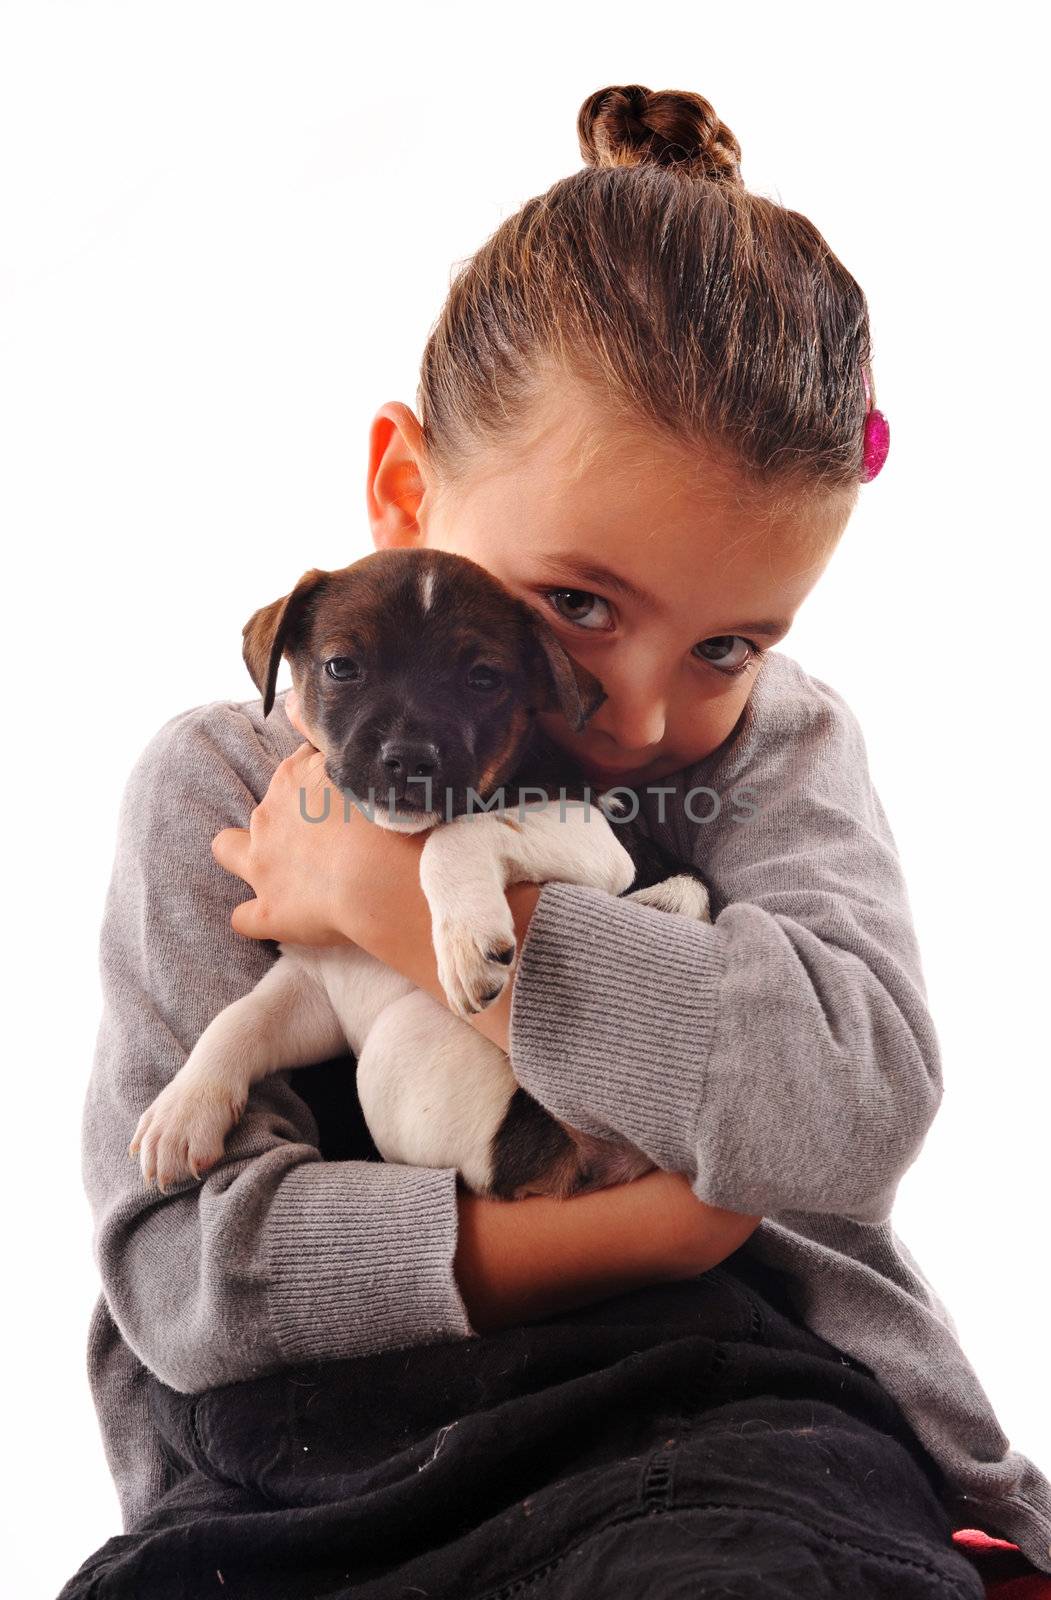 little girl and her puppy purebred jack russel terrier